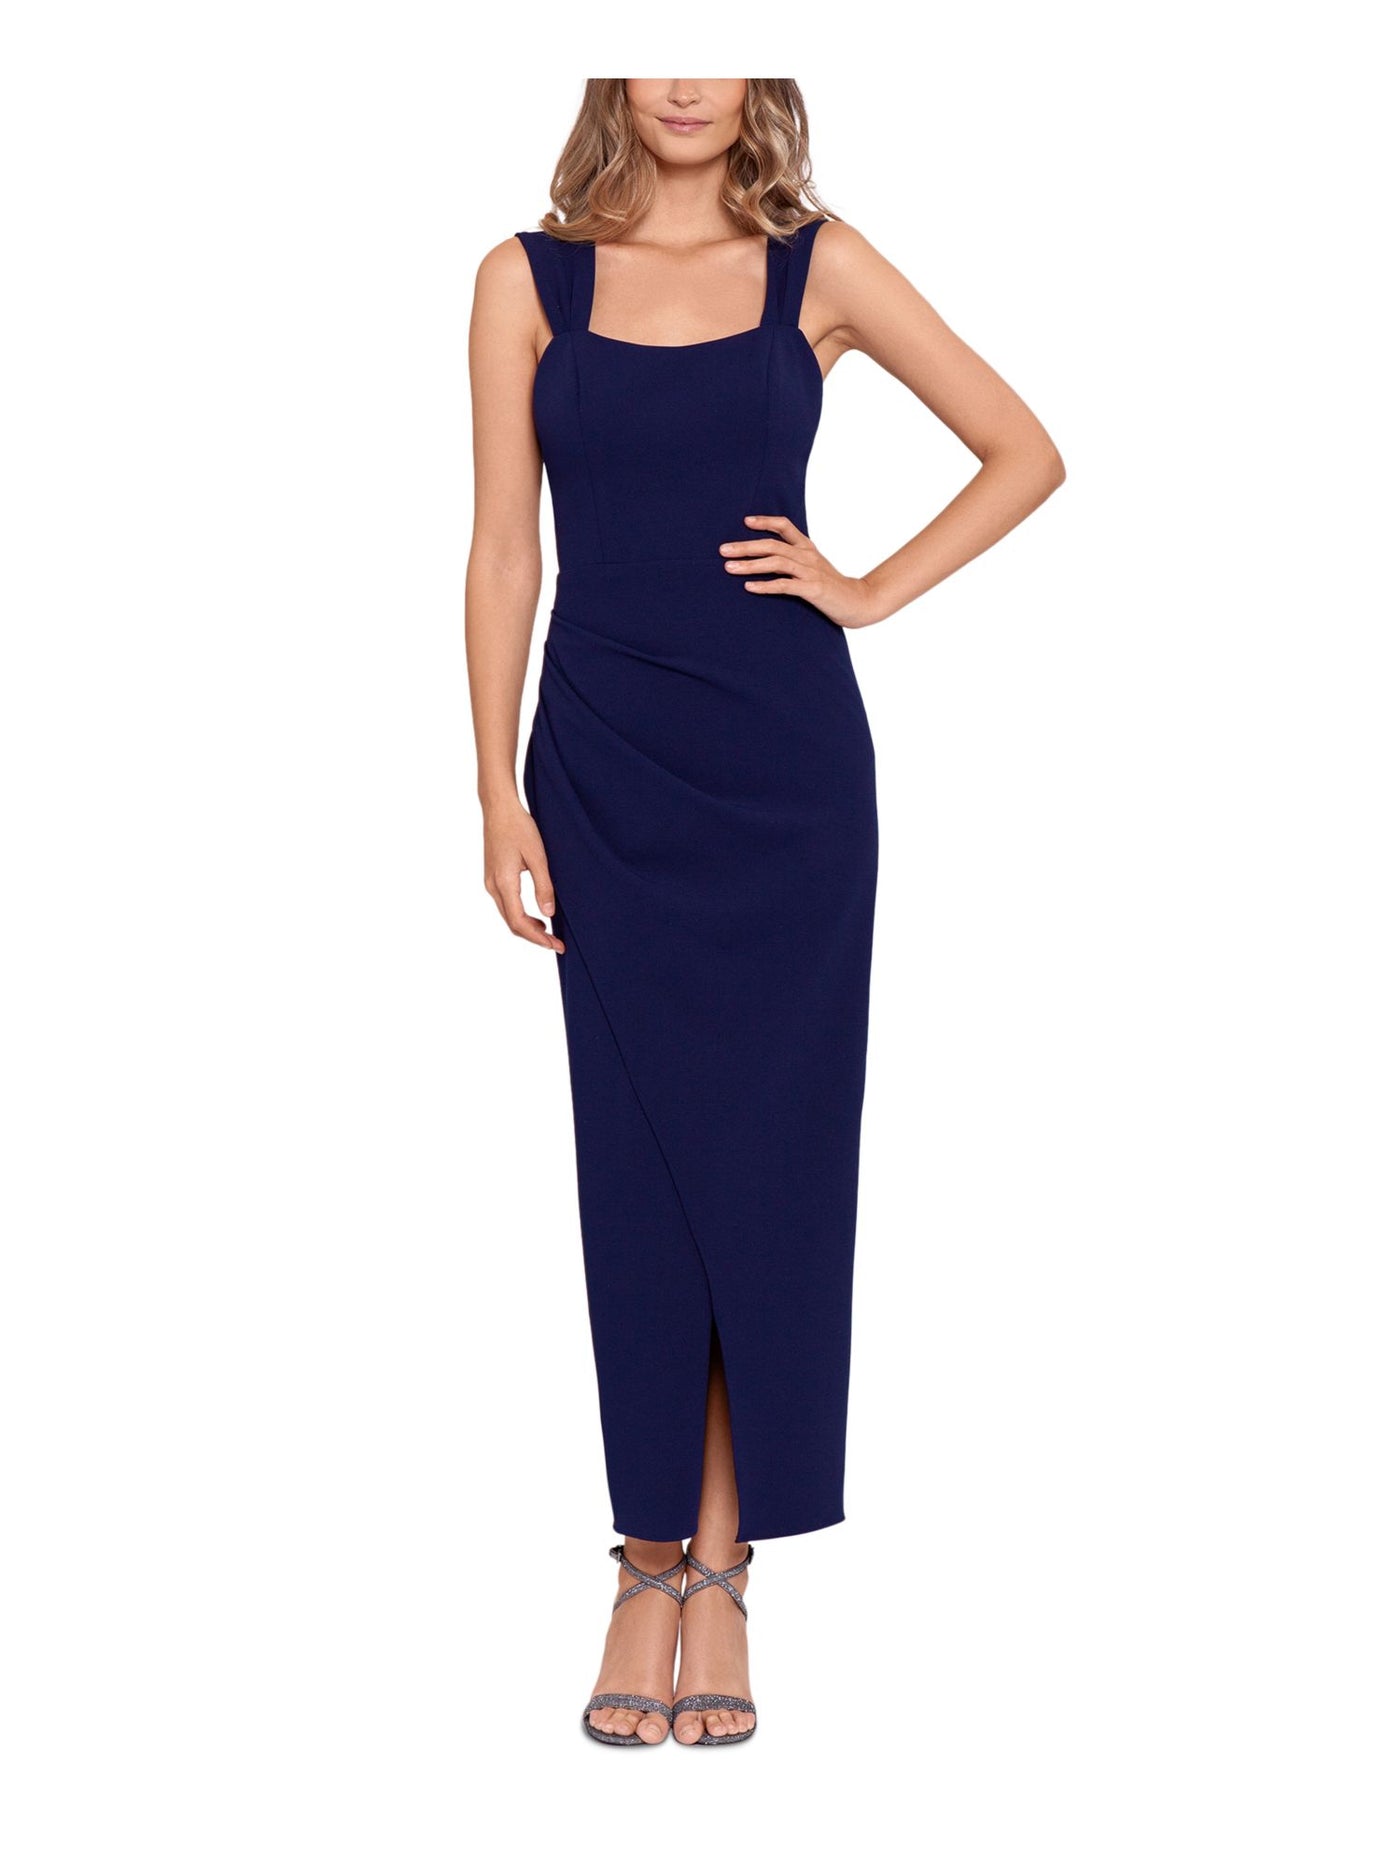 BETSY & ADAM Womens Navy Zippered Slitted Faux Tie Center Back Lined Sleeveless Square Neck Full-Length Evening Gown Dress 12